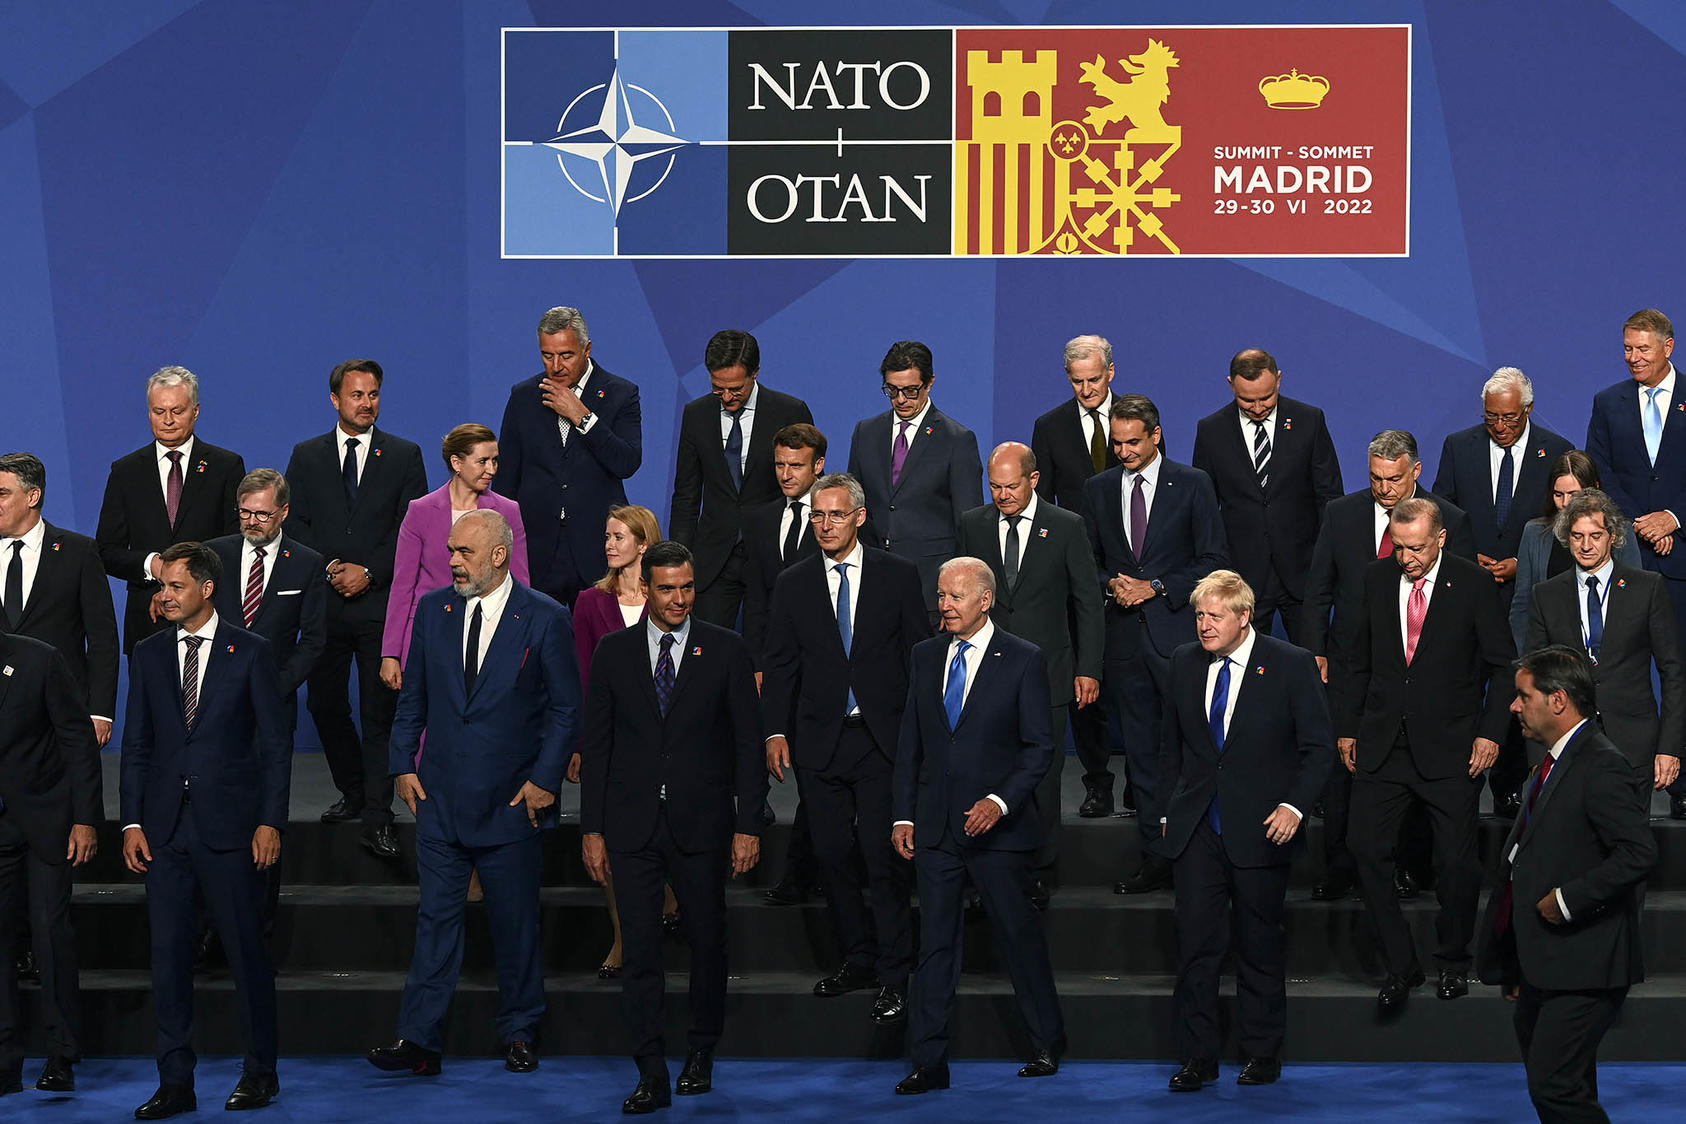 NATO leaders leave the podium after their formal group photo at the alliance’s summit conference in Madrid, where they reaffirmed NATO’s support for Ukraine’s self-defense against Russia’s invasion. (Kenny Holston/The New York Times)